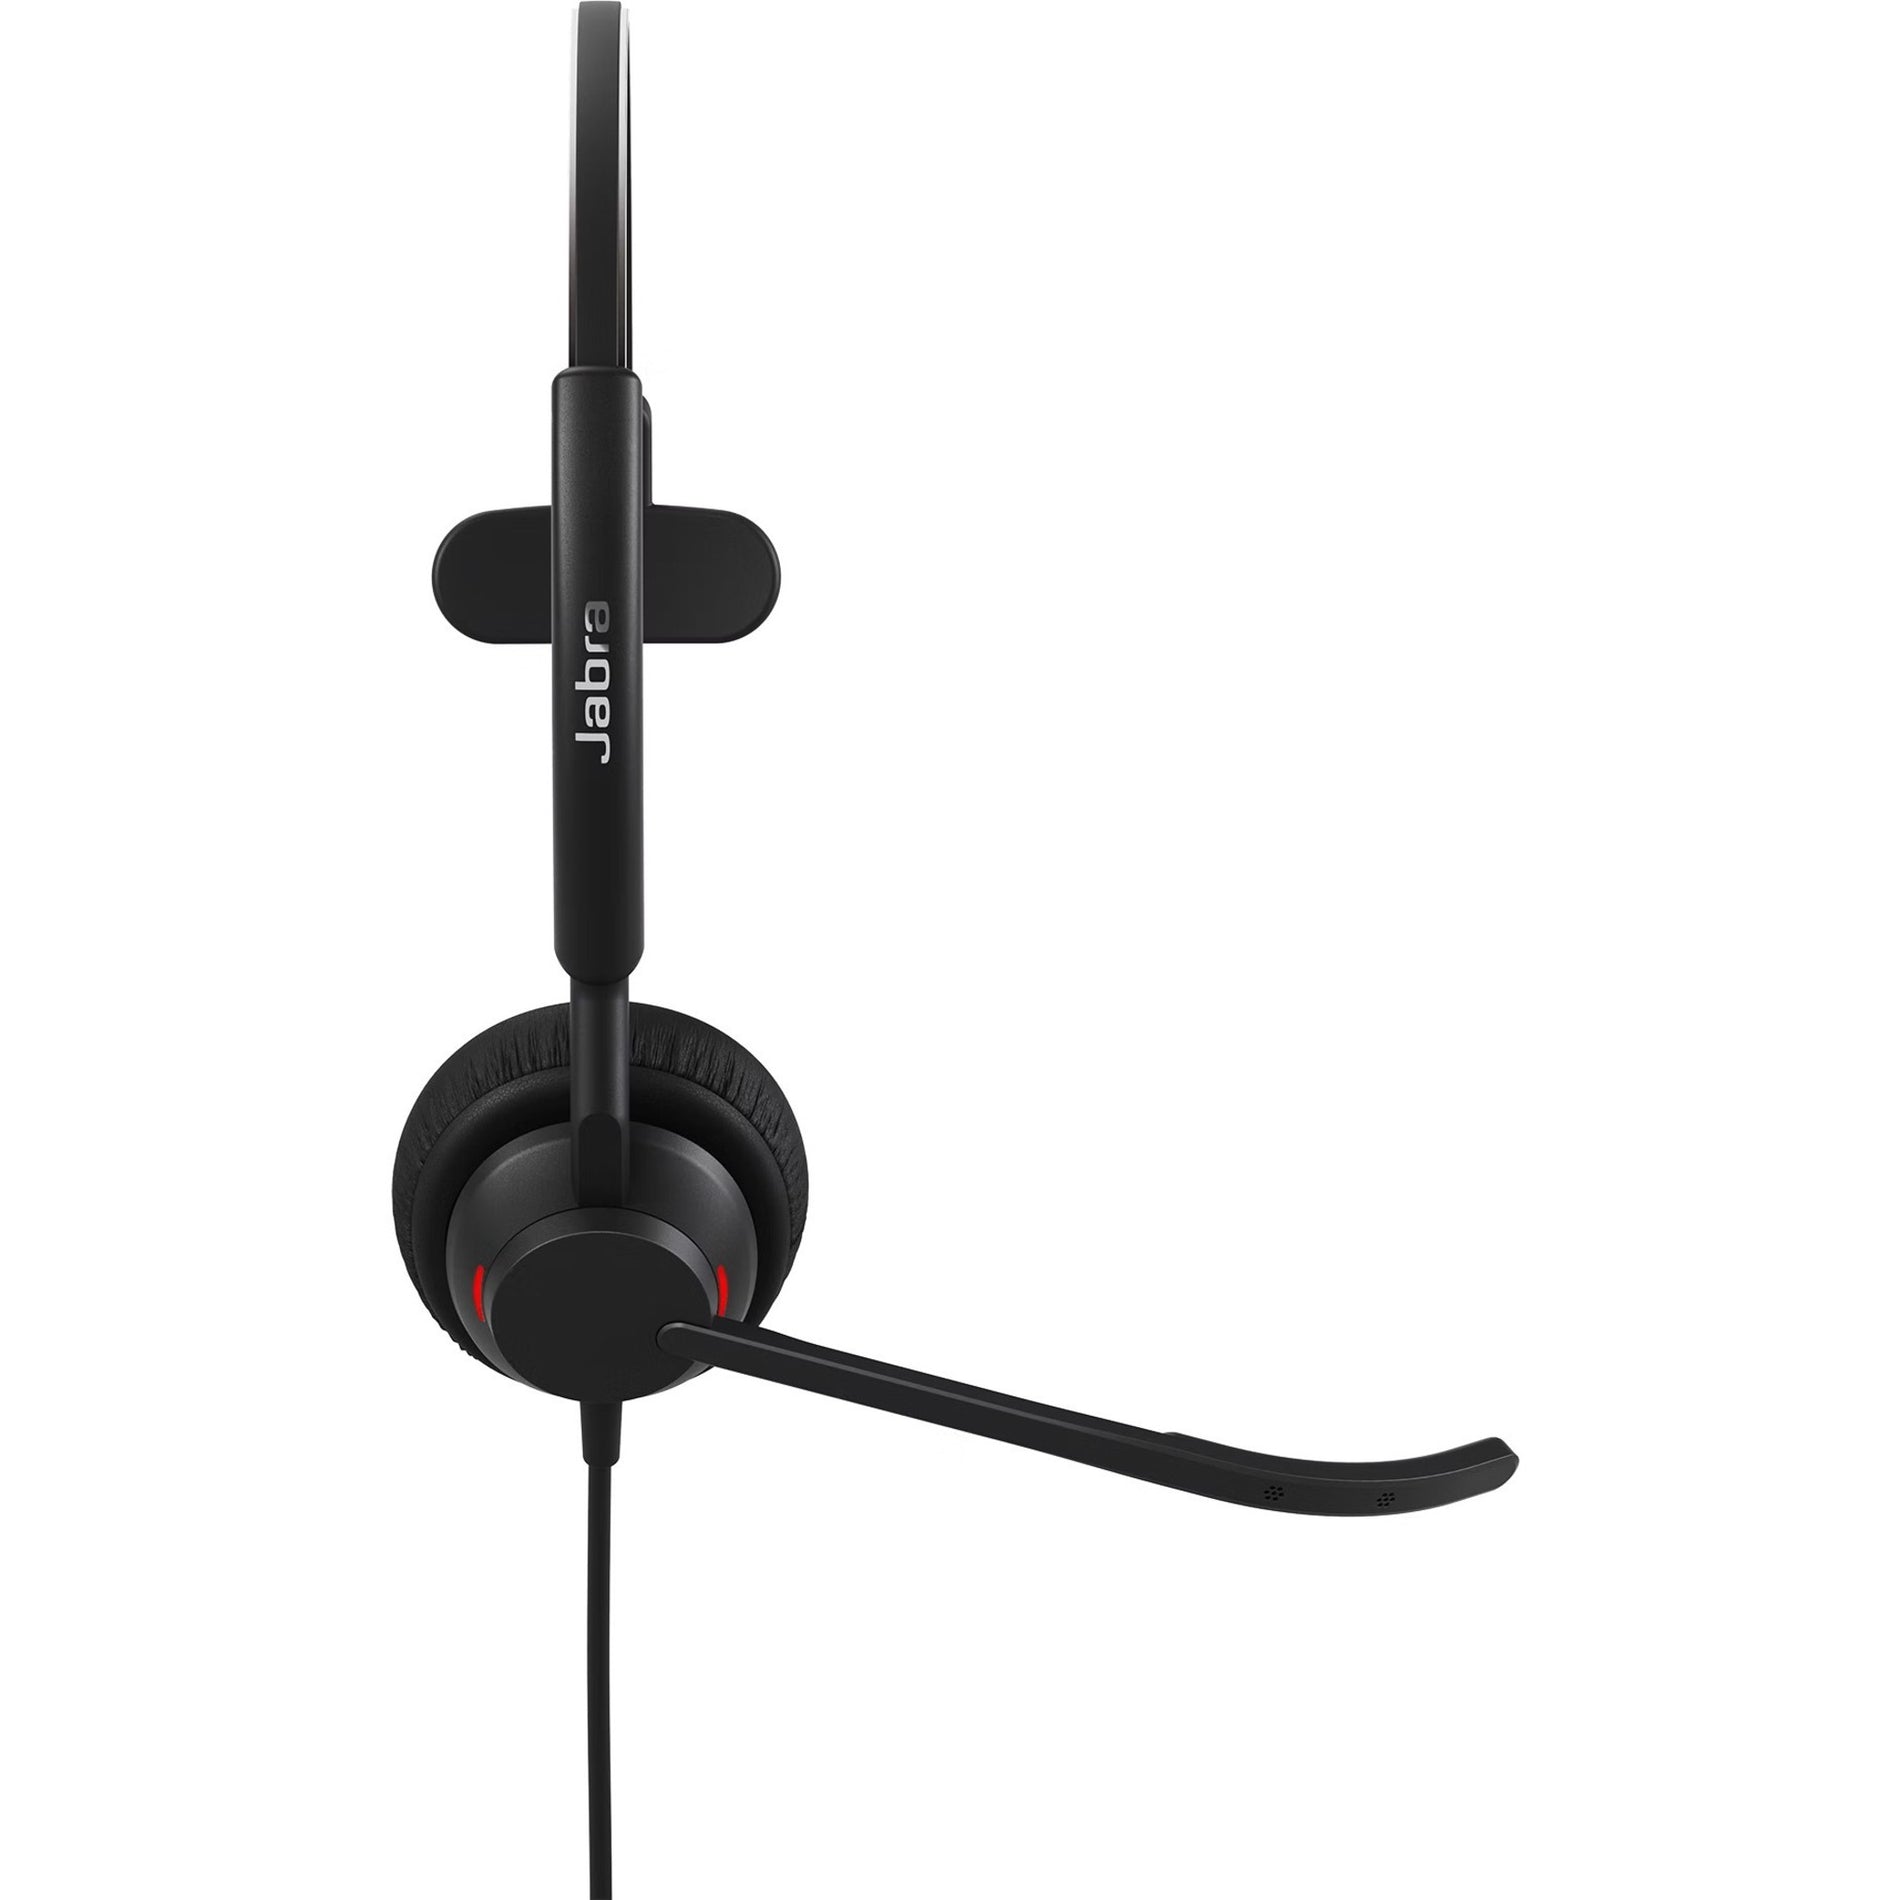 Jabra 5093-299-2259 Engage 50 II Headset, Mono Wired Over-the-head USB Type C Headset with Boom Microphone, 3 Year Warranty